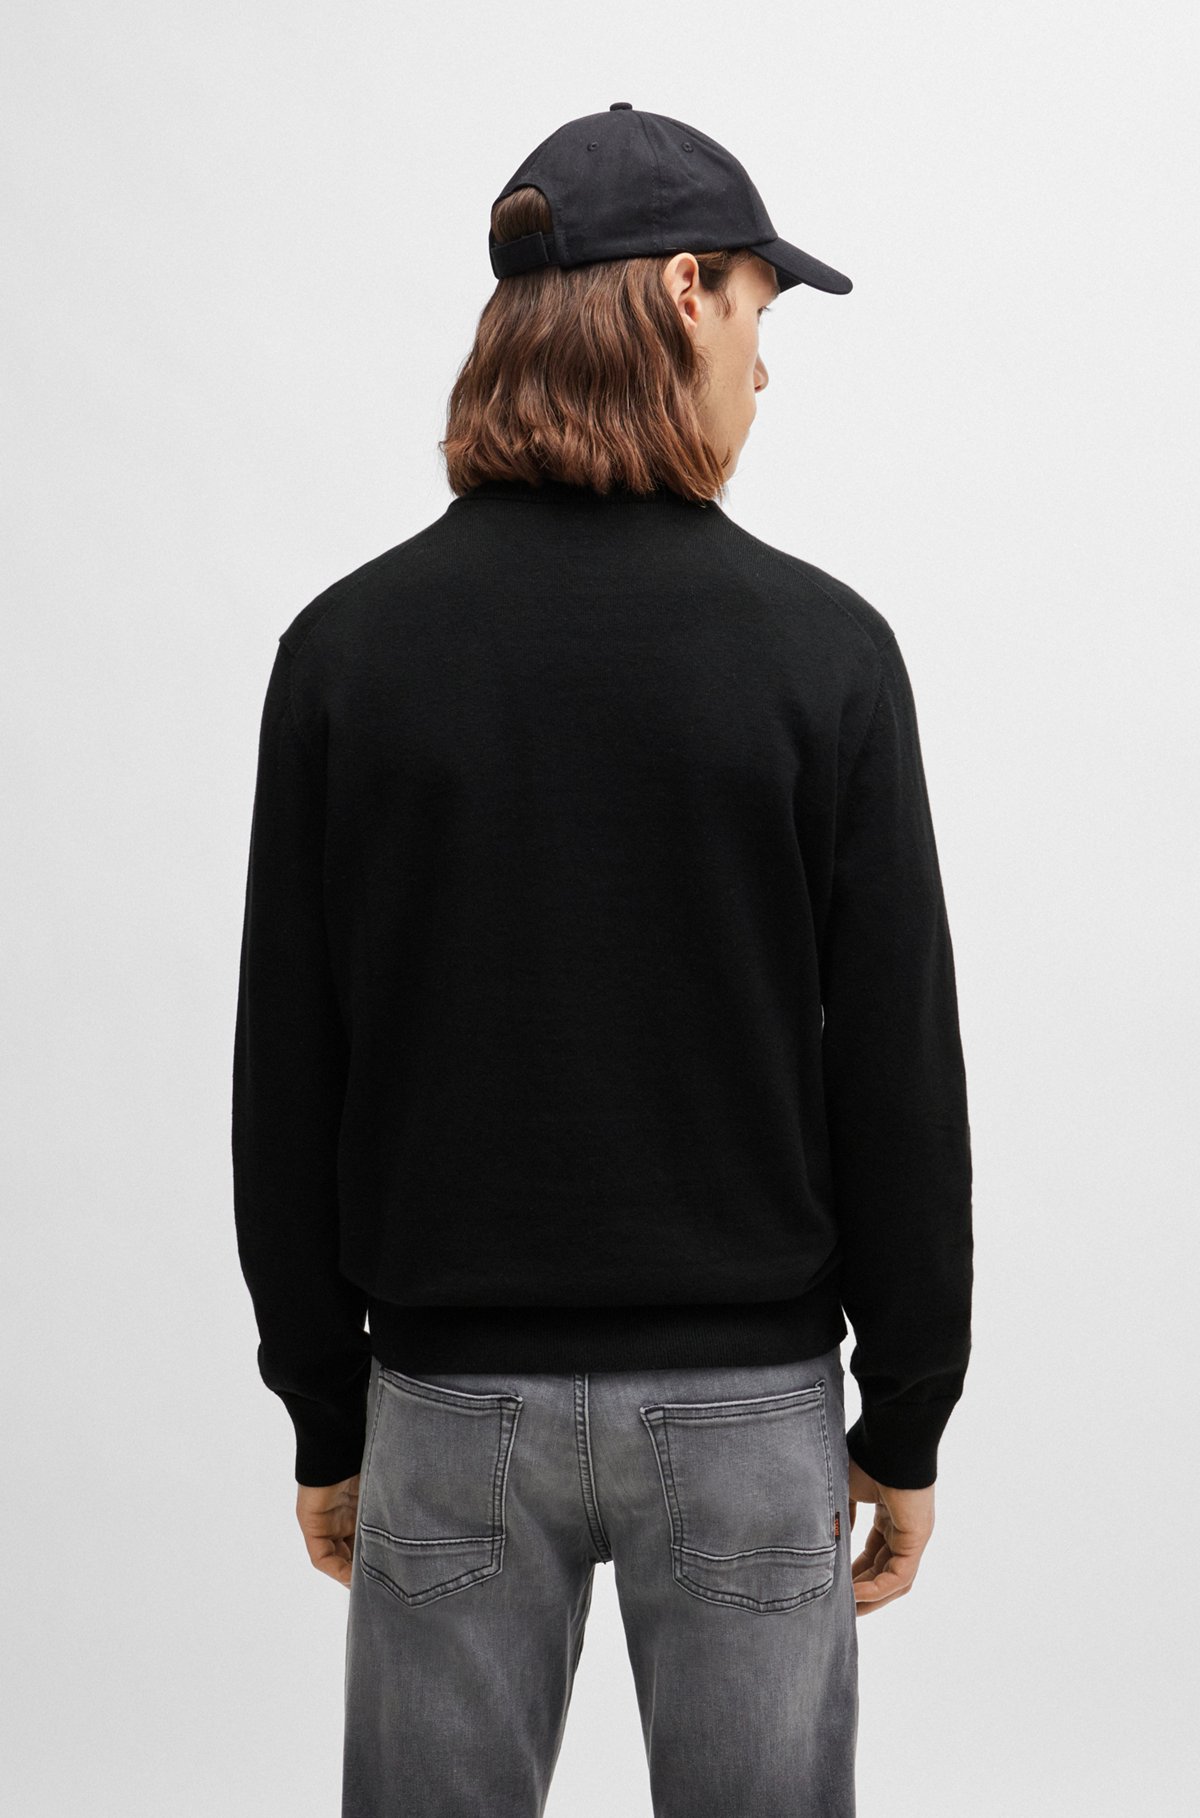 Crew-neck sweater in cotton and cashmere with logo, Black